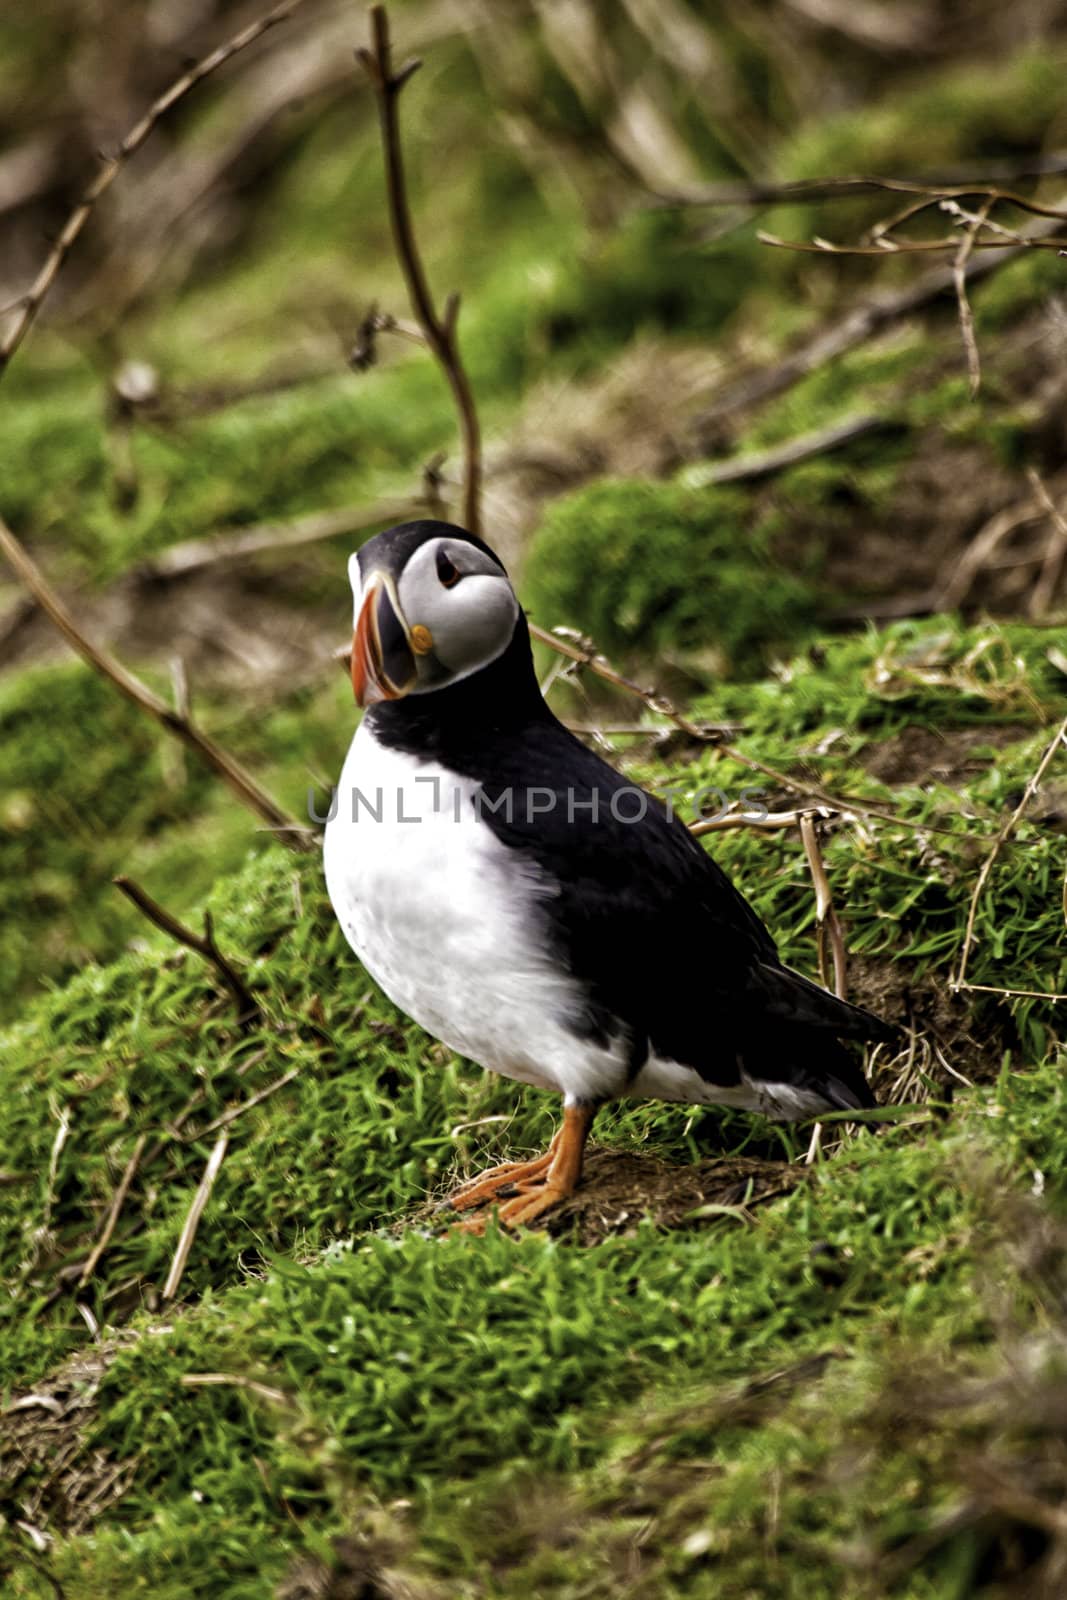 Single adult puffin standing on a grassy slope keeping a watchful eye on the camera